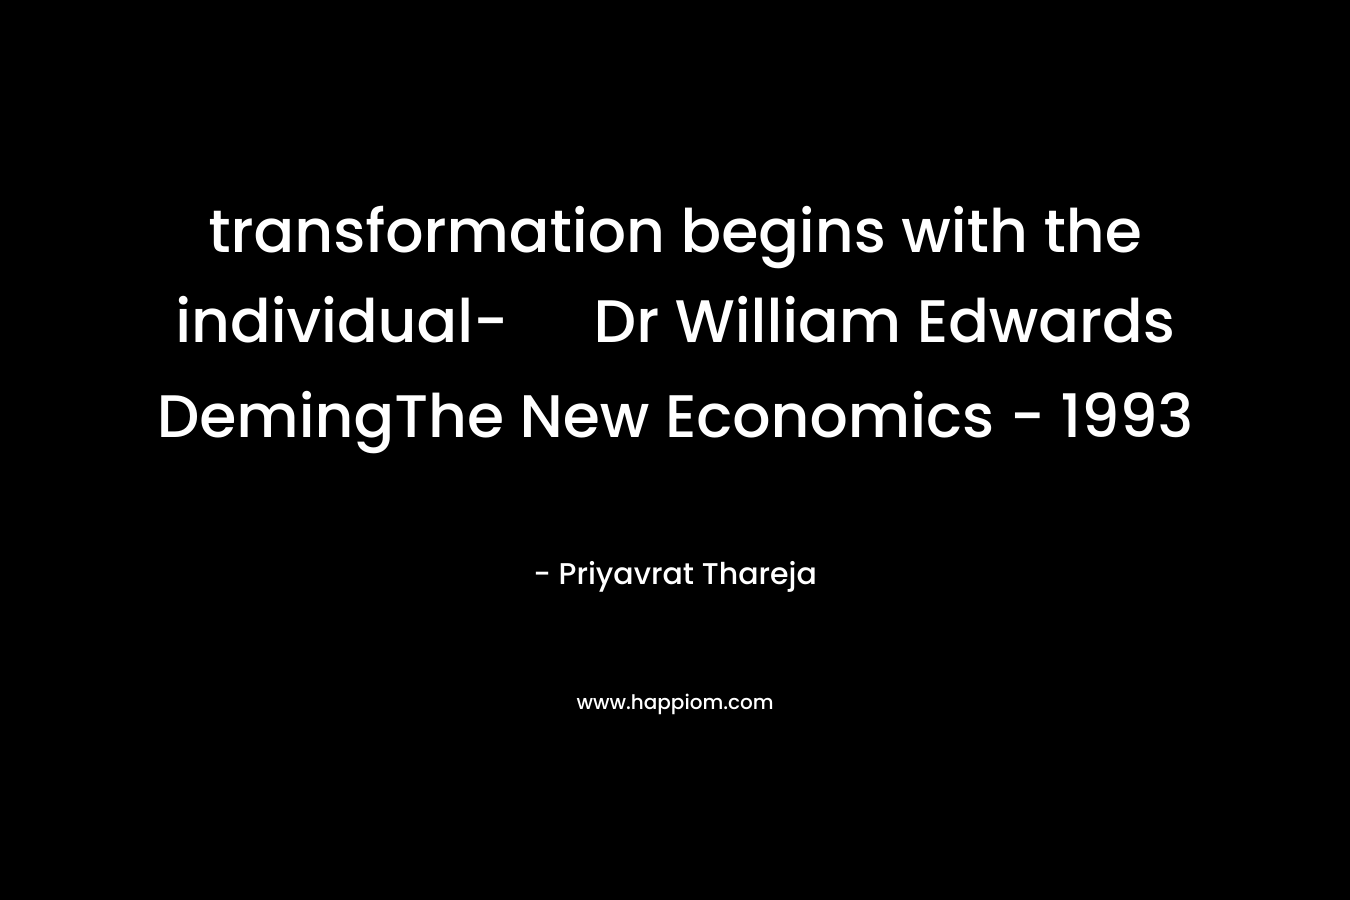 transformation begins with the individual- Dr William Edwards DemingThe New Economics - 1993